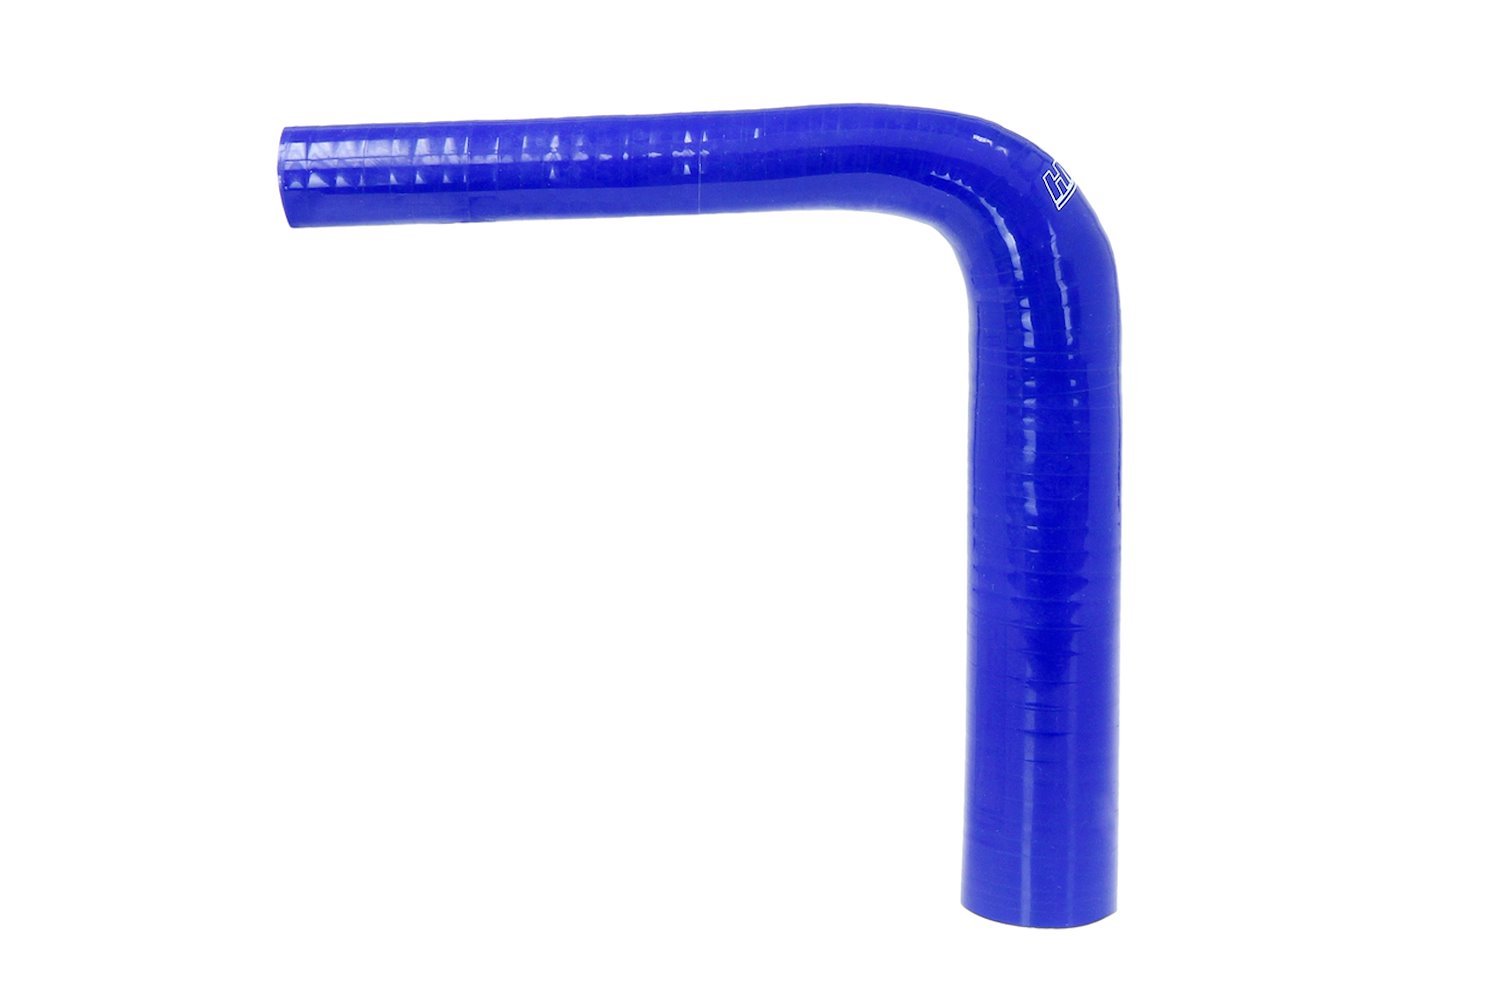 HTSER90-062-150-BLUE Silicone 90-Degree Elbow Hose, High-Temp 4-Ply Reinforced, 5/8 in. - 1-1/2 in. ID, Blue